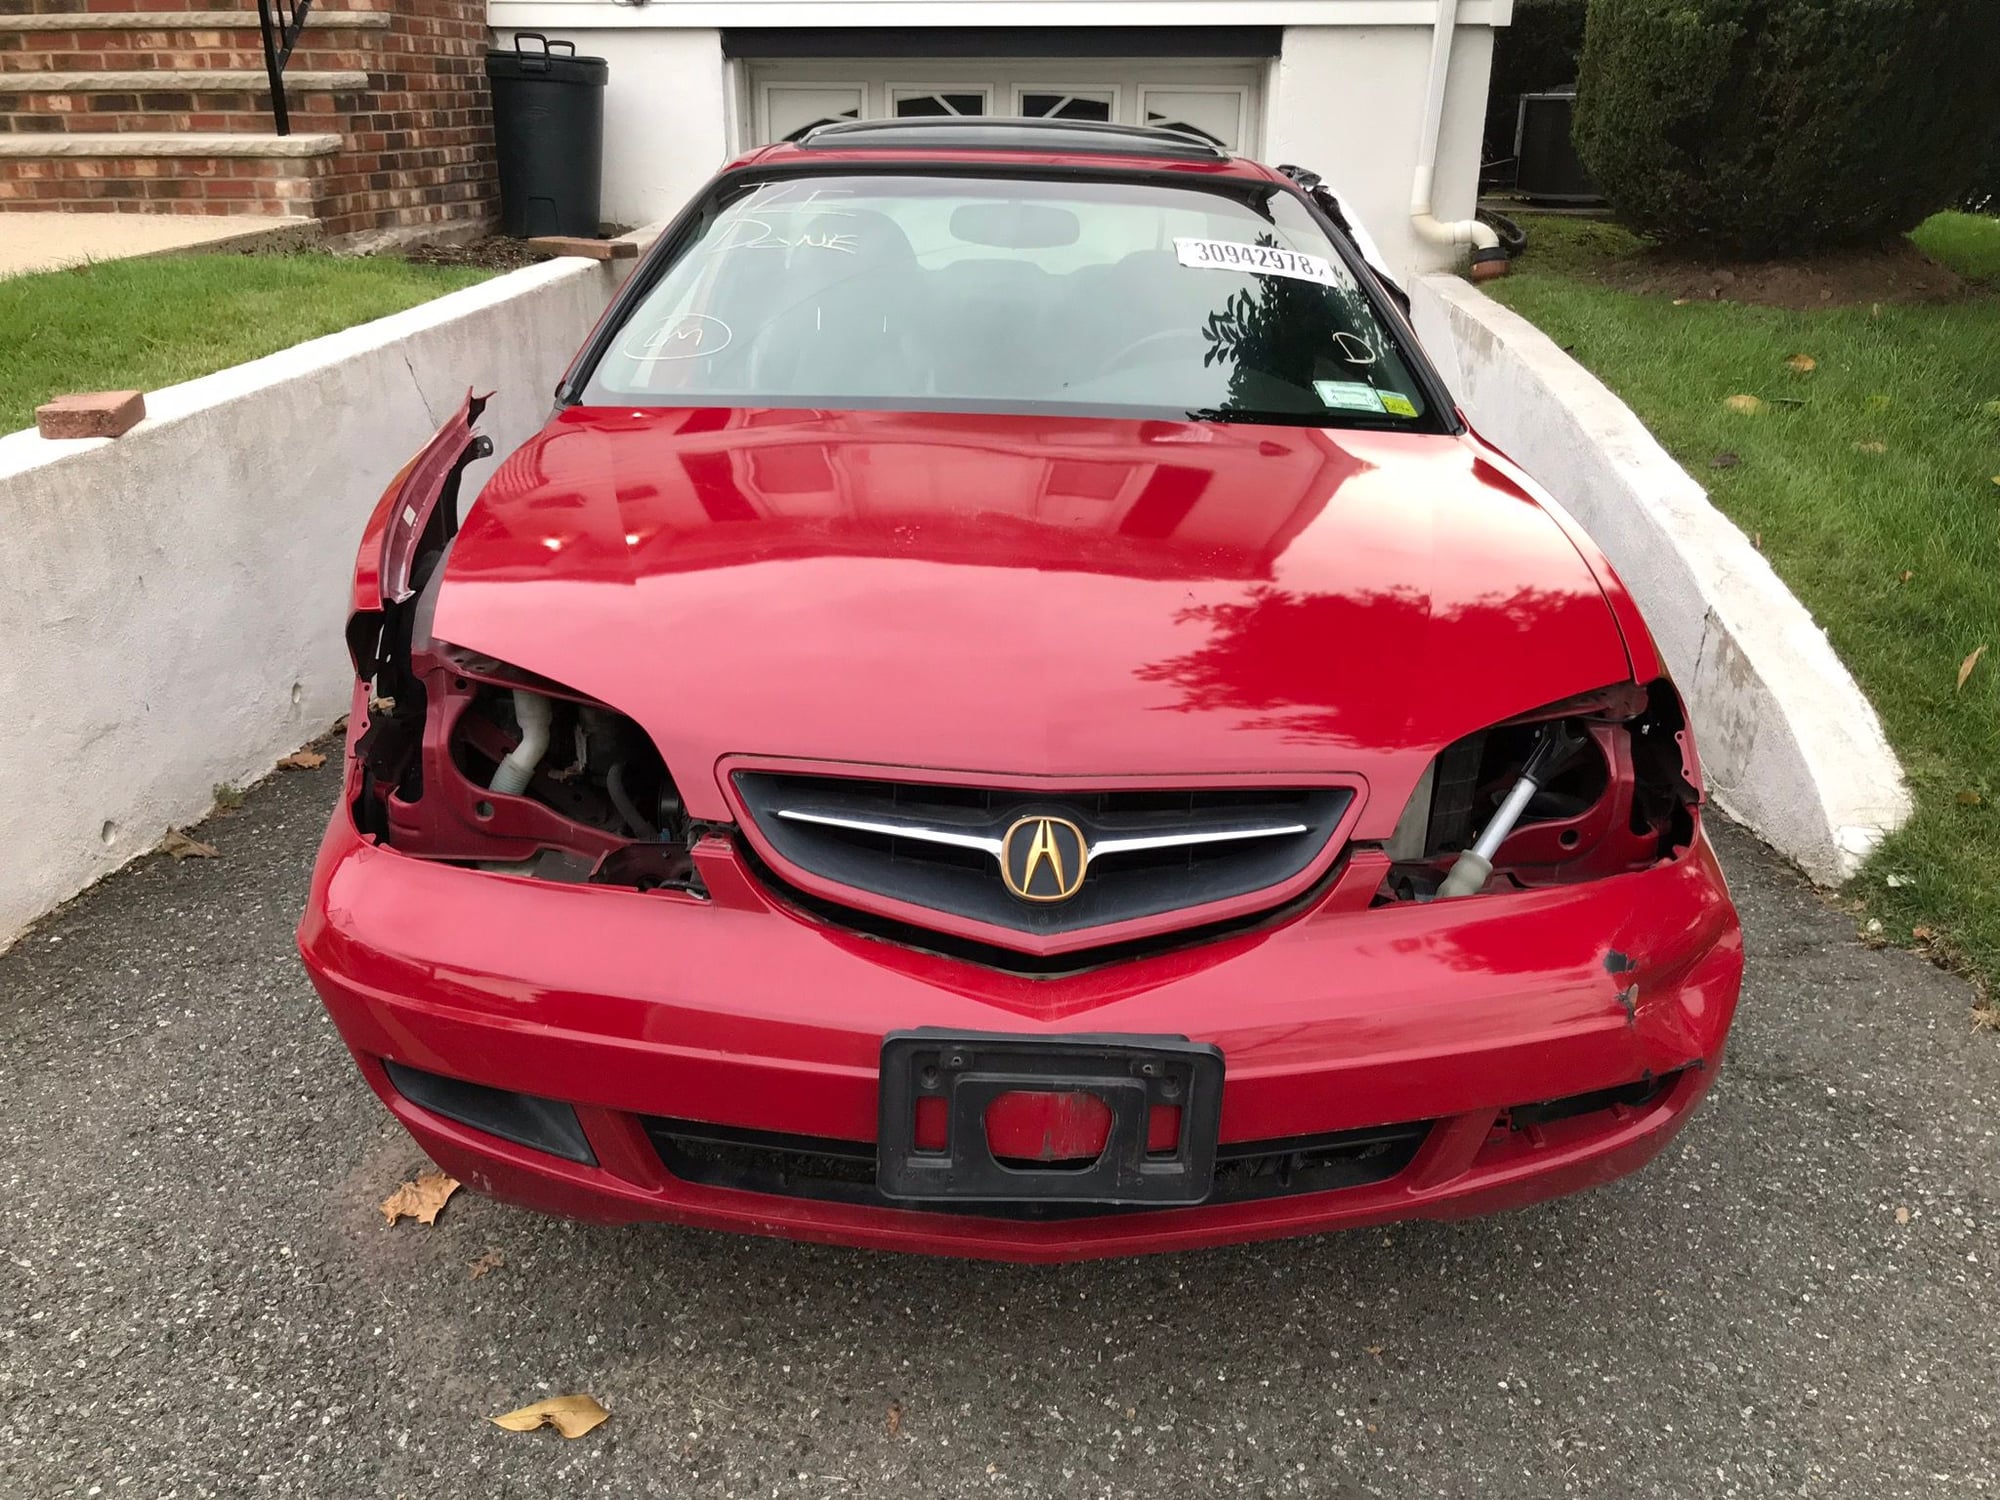 2003 Acura CL - FS: 2003 Acura CL Type S Parts Car...... - Used - VIN 19uya41753a012345 - 6 cyl - 2WD - Automatic - Coupe - Red - Belleville, NJ 07109, United States